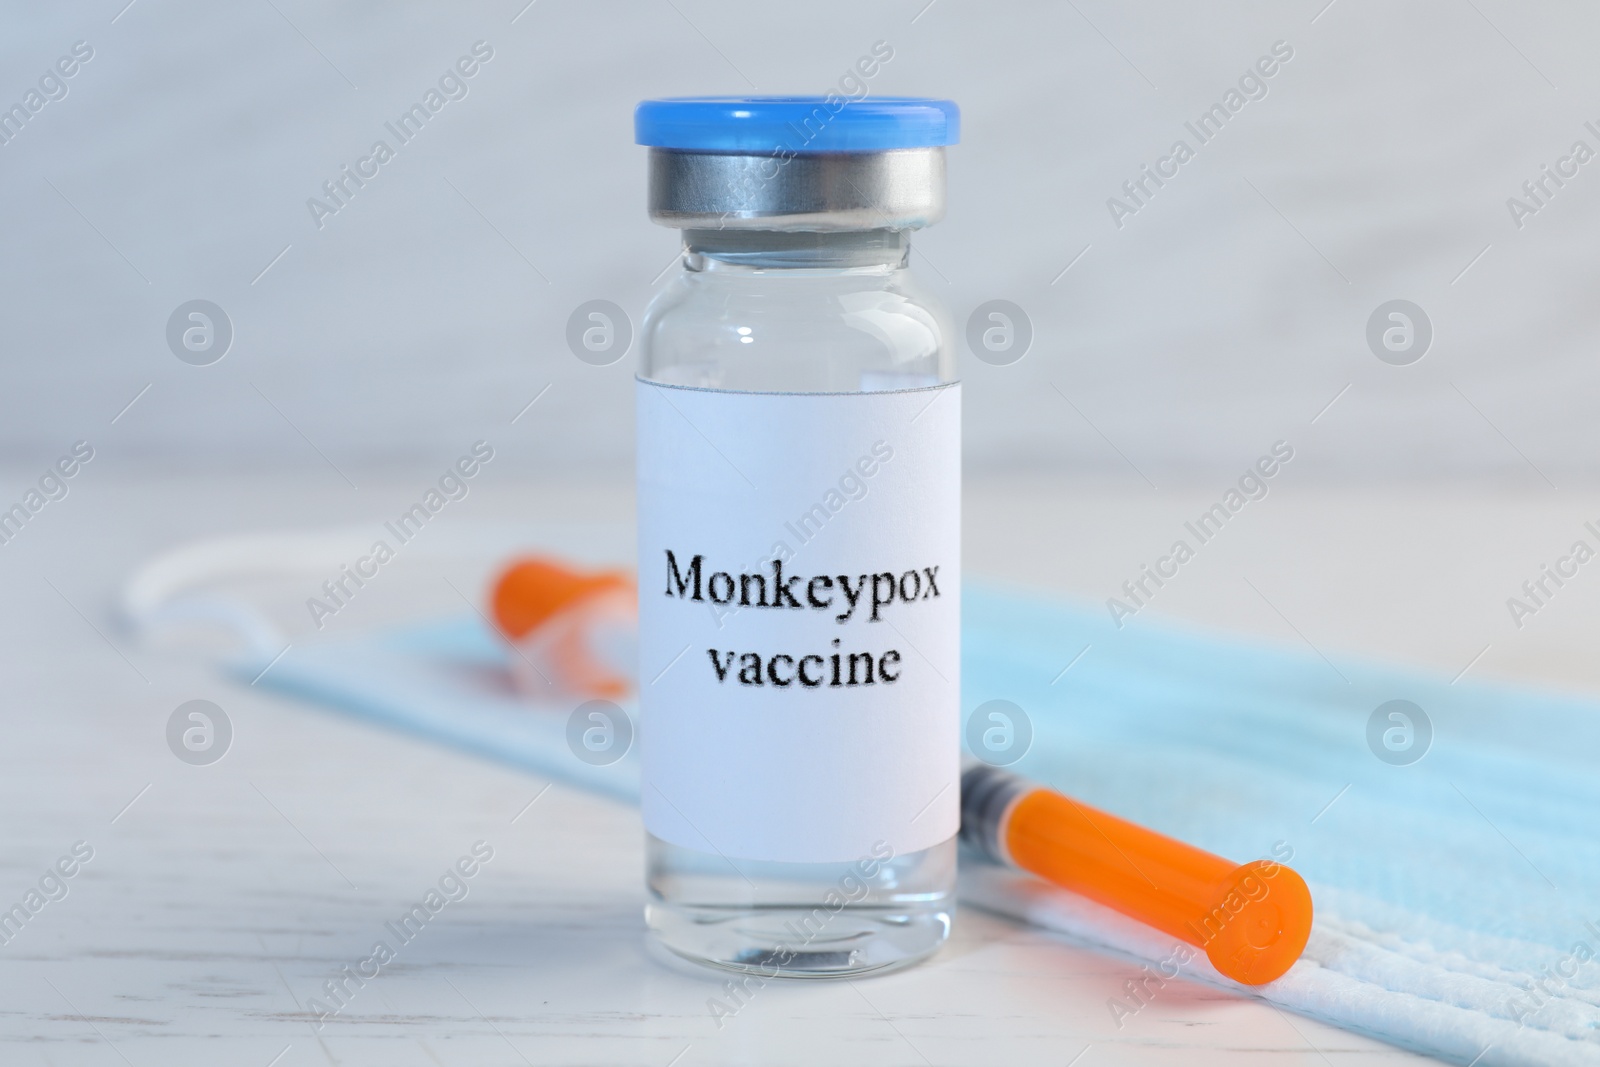 Photo of Monkeypox vaccine in glass vial, medical mask and syringe on white wooden table